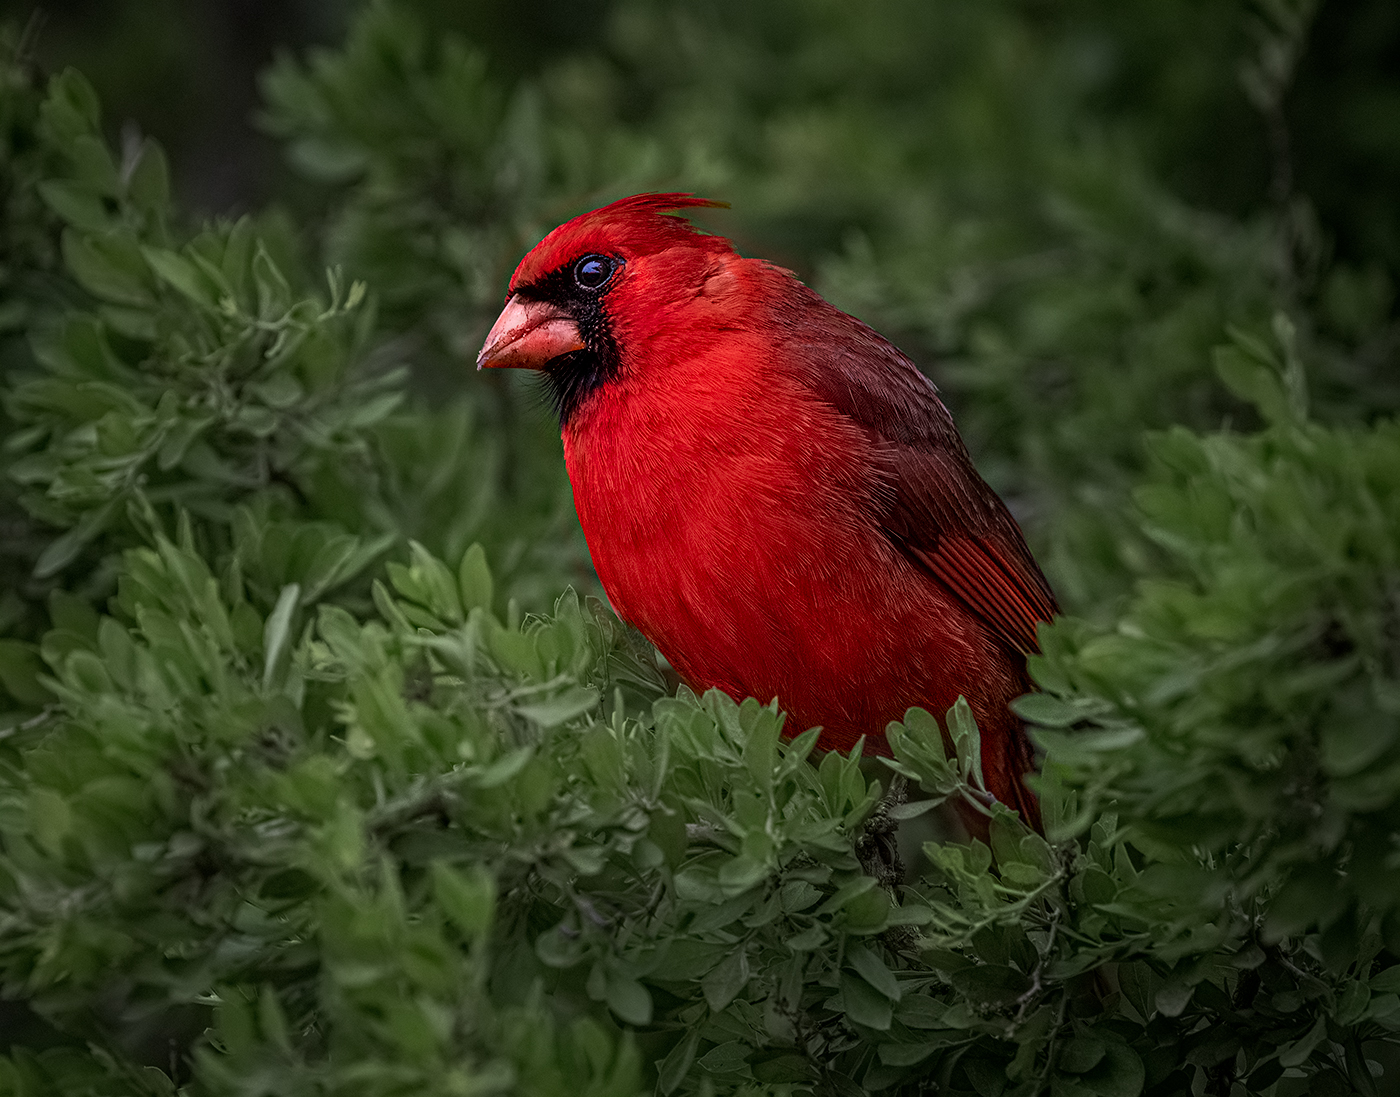 South_Texas_Cardinal_Staging_Fisher.jpg